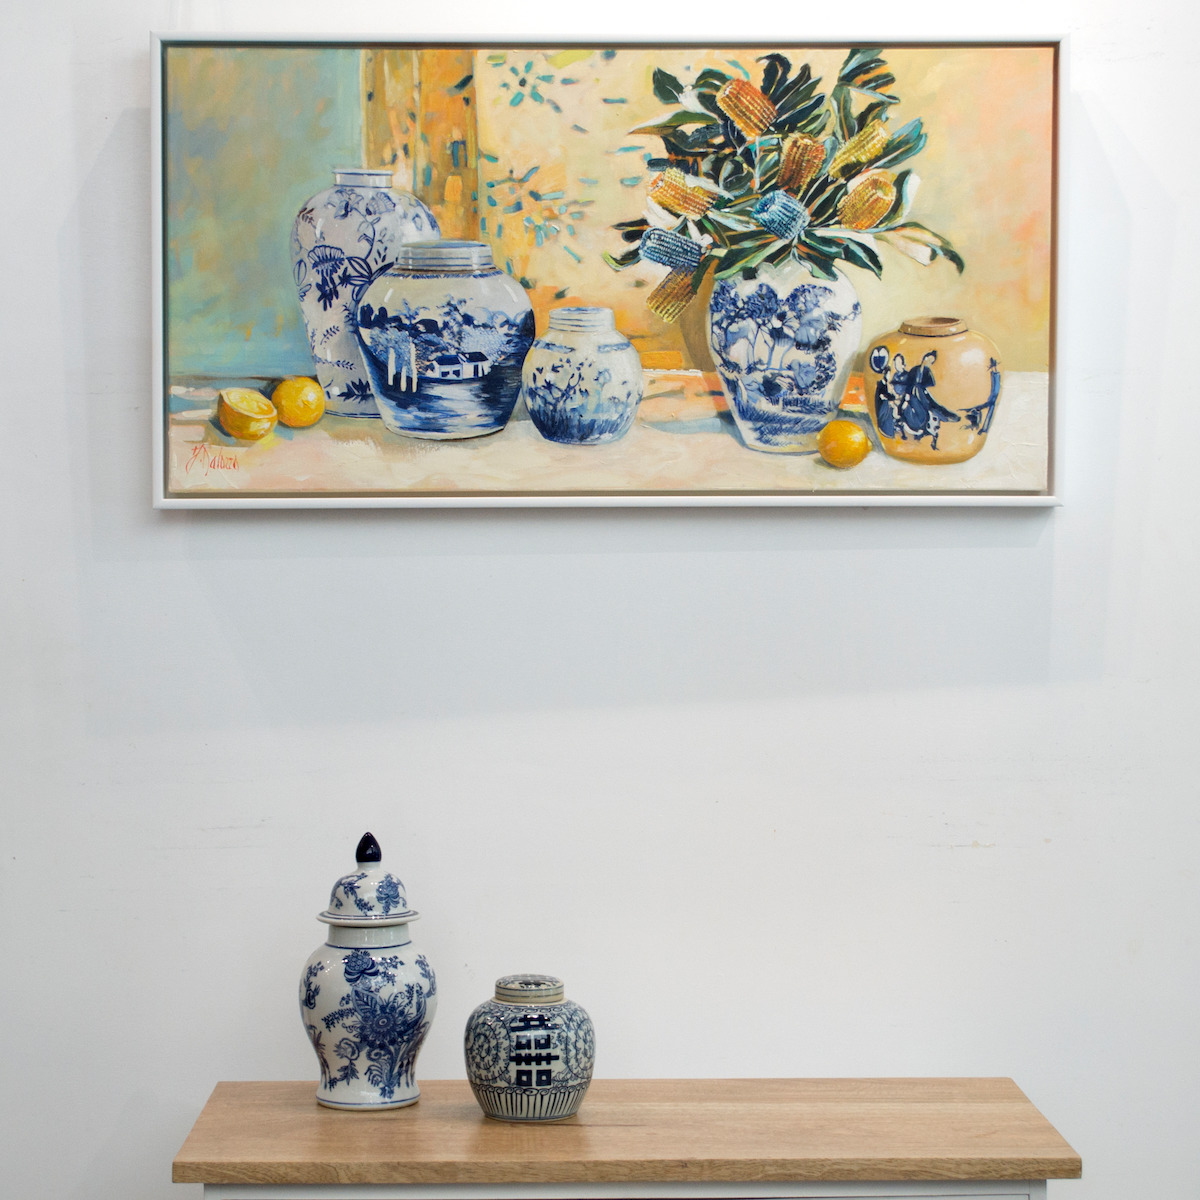 Wall Design Ideas 1 With Still Life Painting "Banksia with China Vases" By Judith Dalozzo